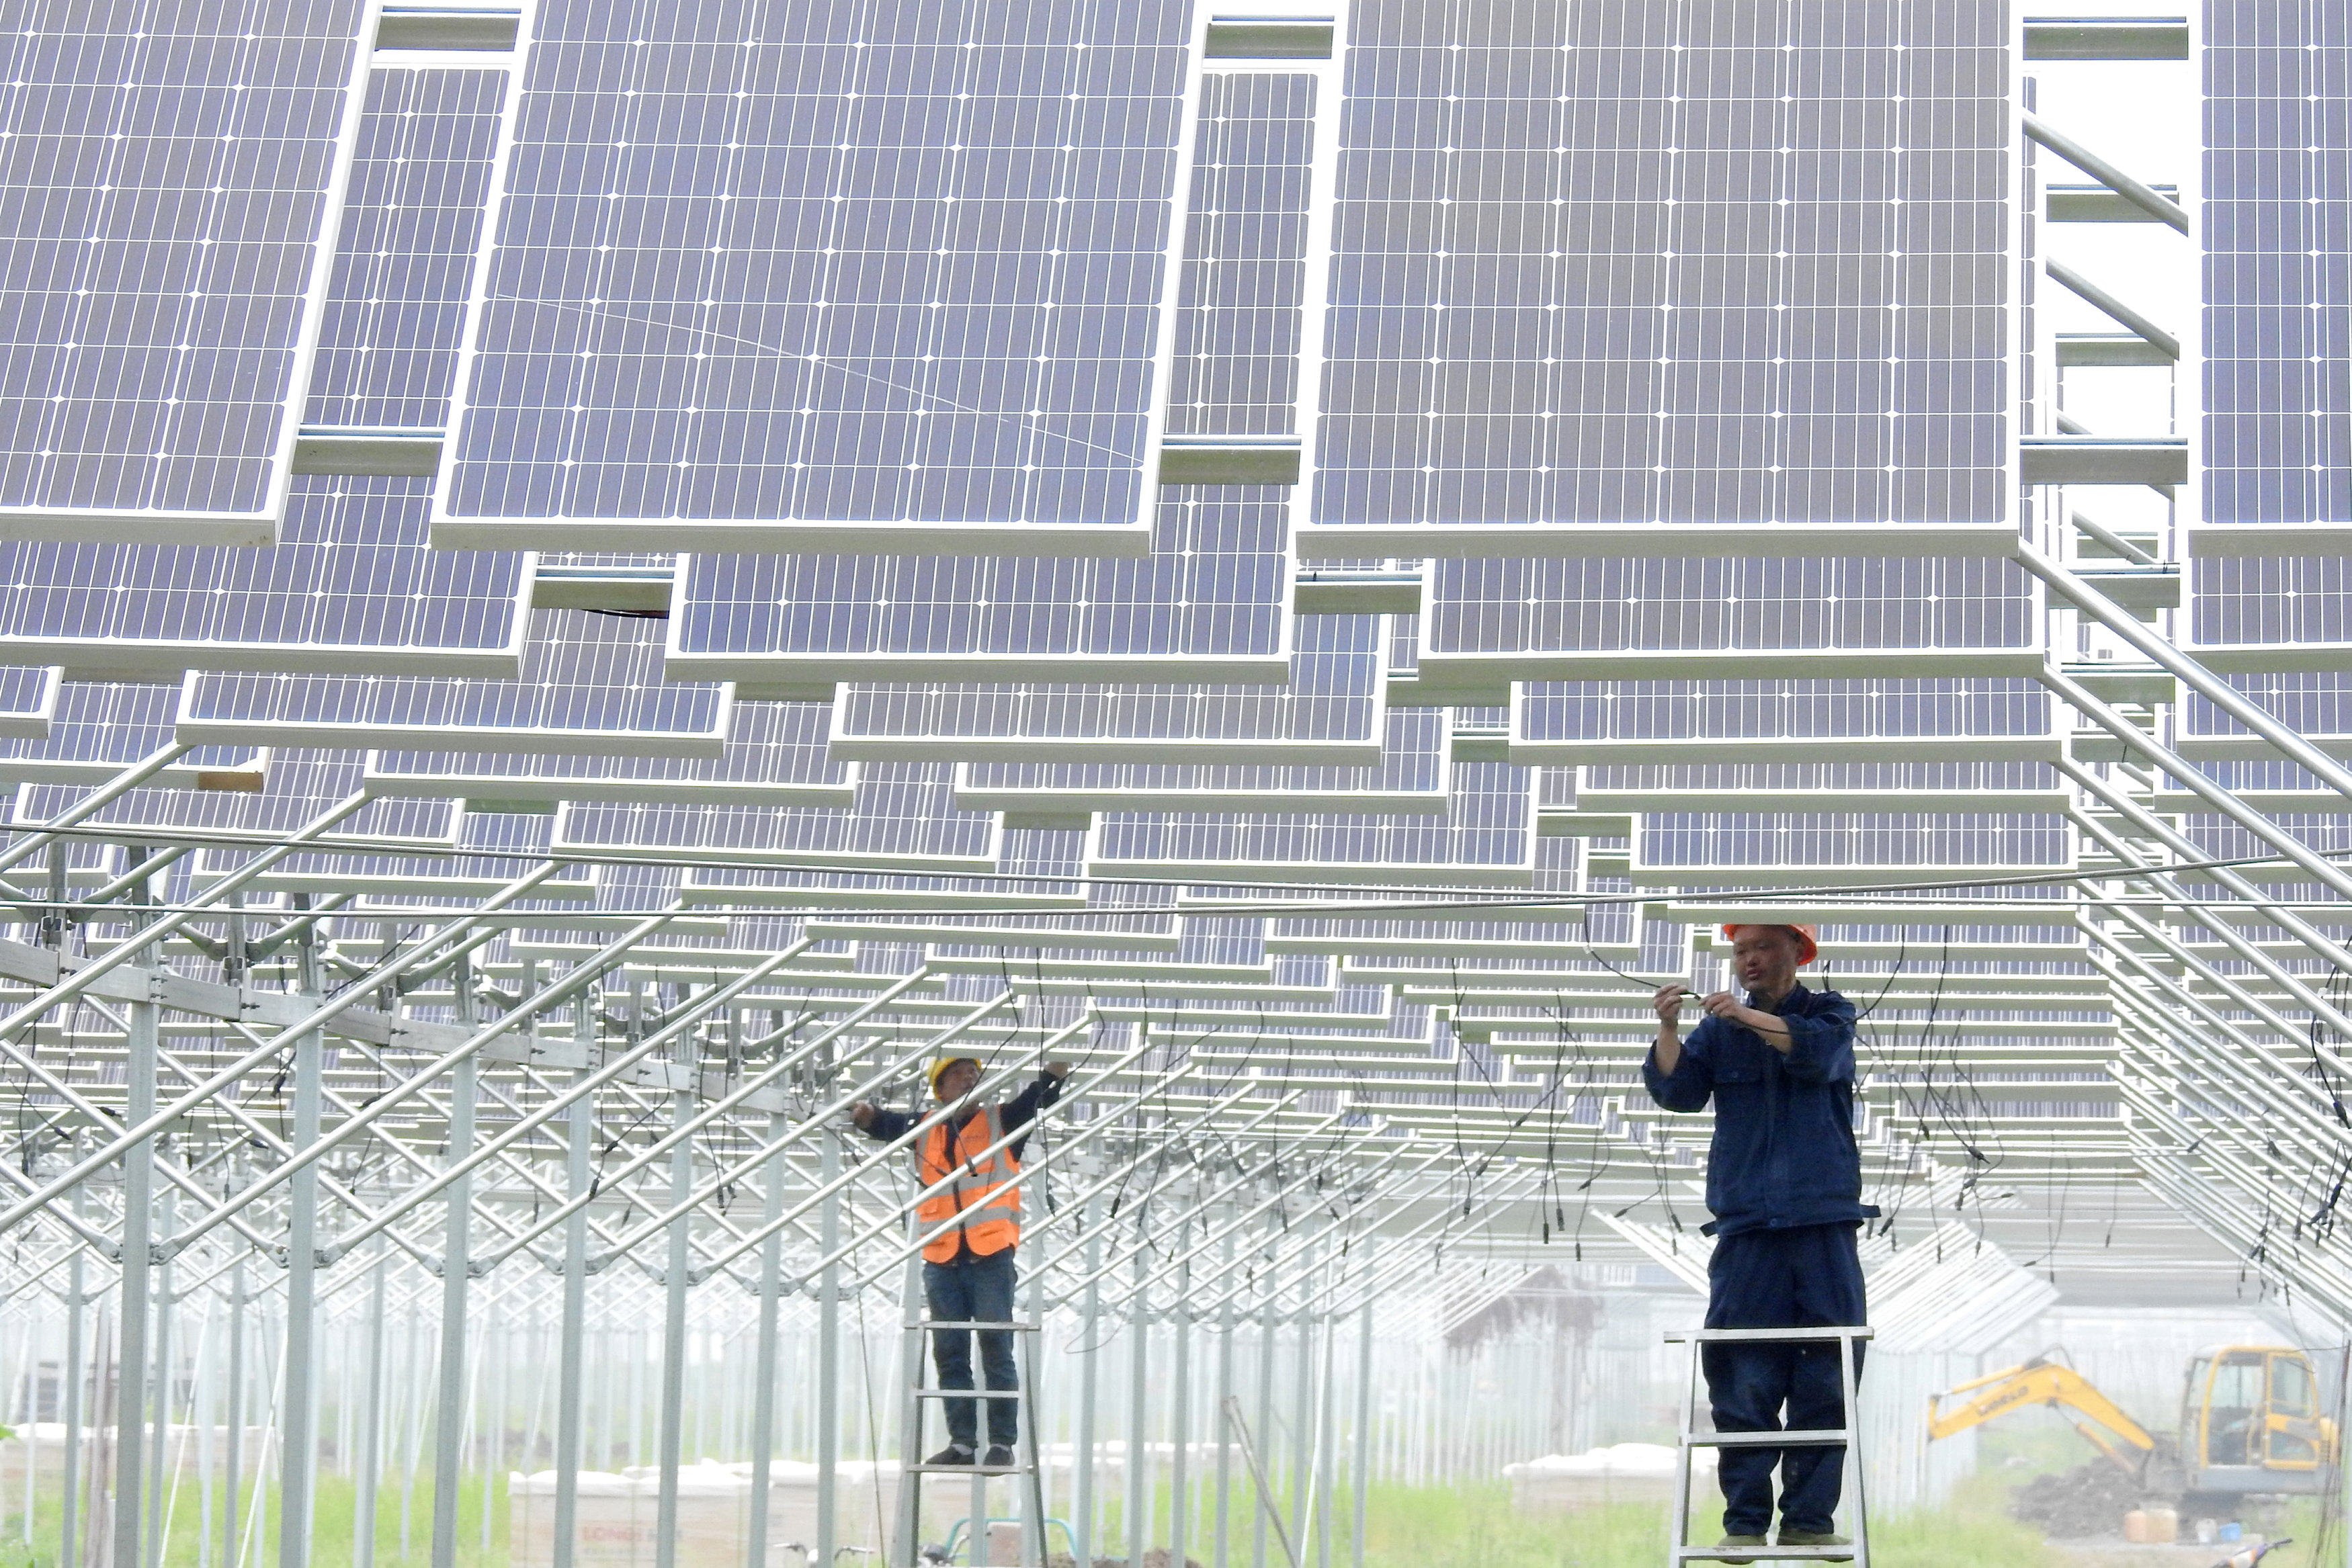 Workers install solar panels in Lianyungang, Jiangsu province. Offshore bond issuance from Chinese firms fell last year. Photo: Reuters 